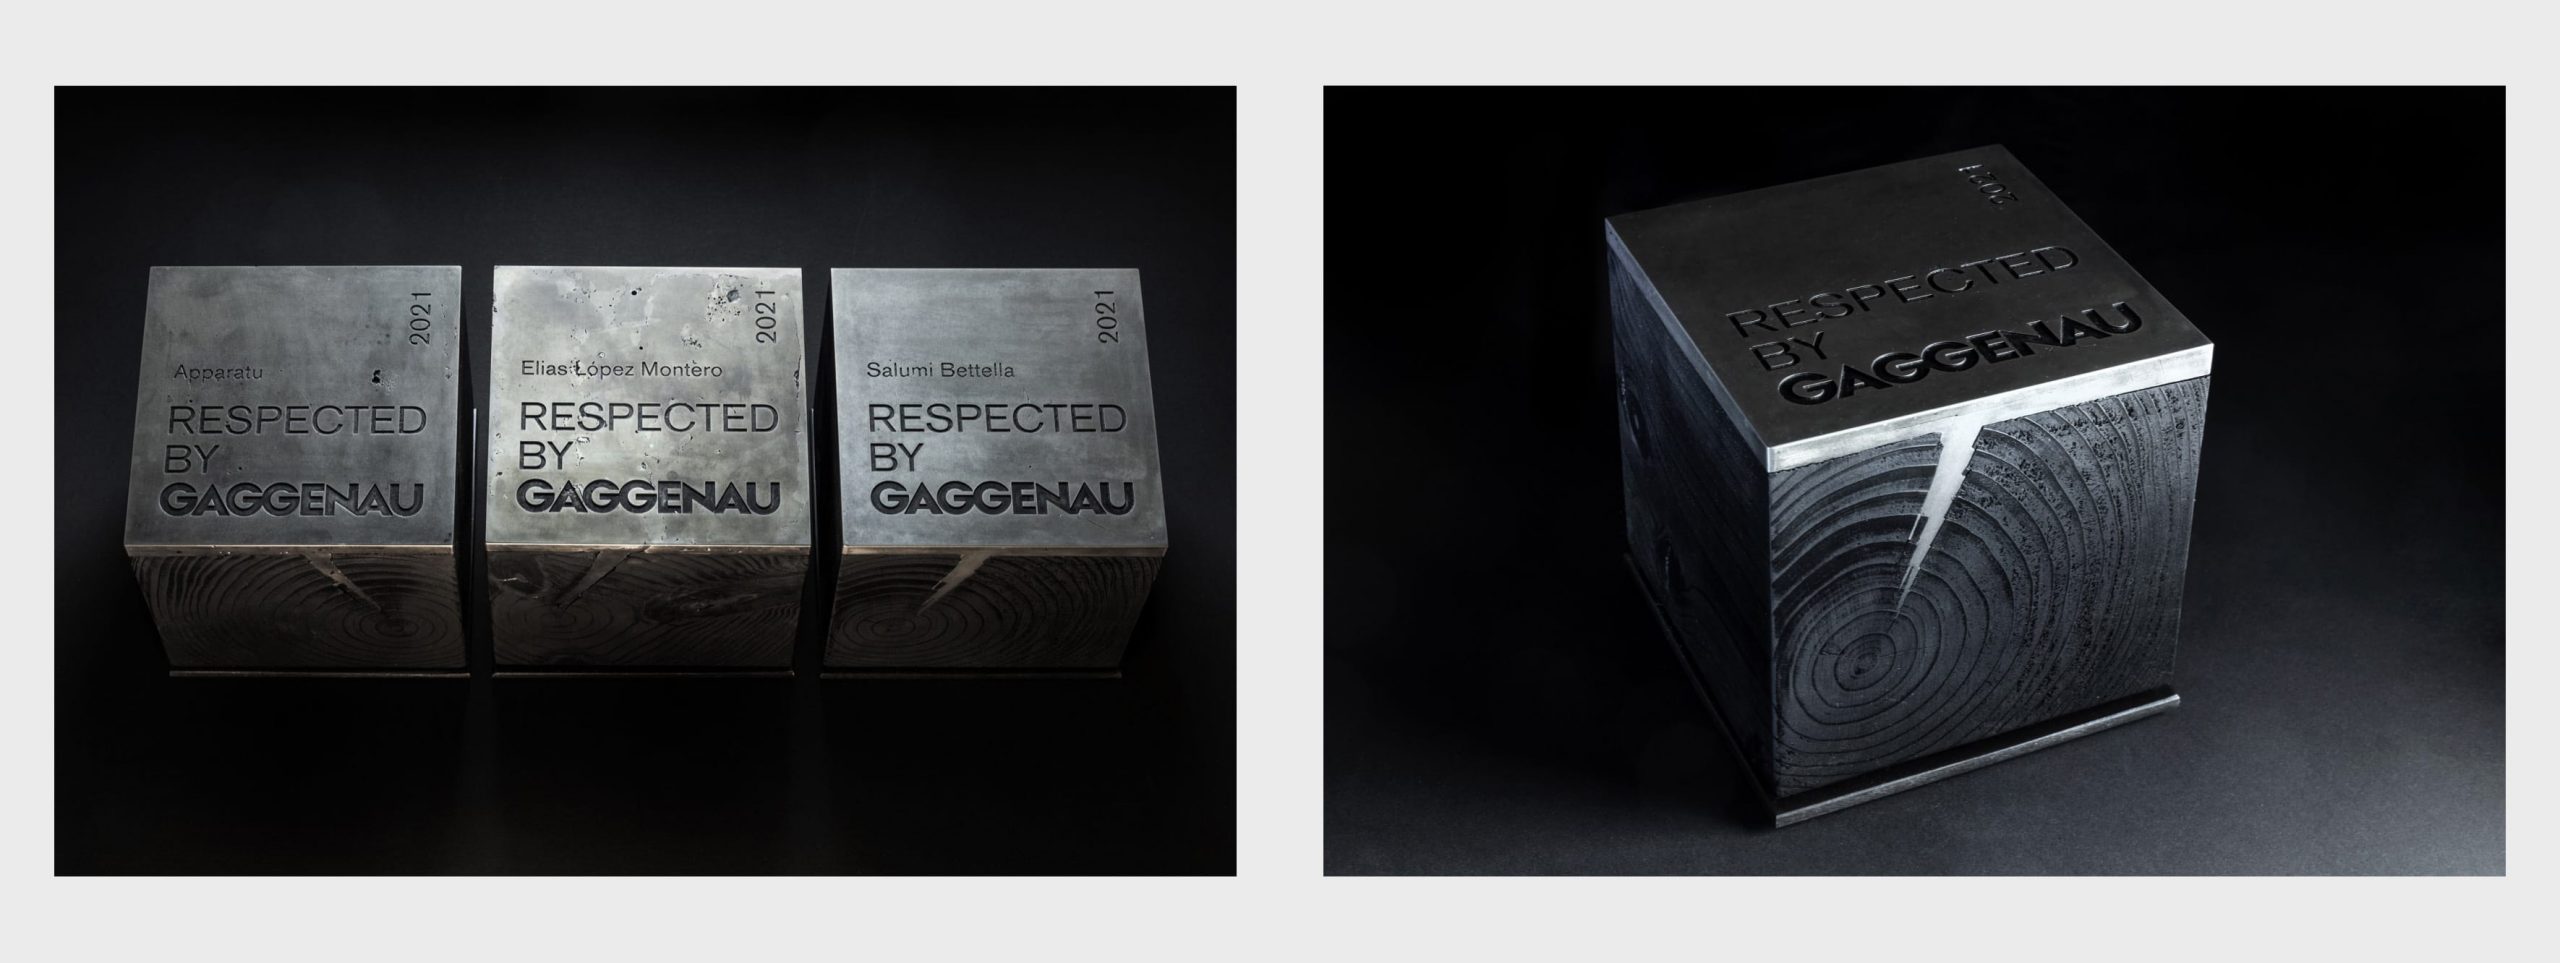 Respected by Gaggenau awards